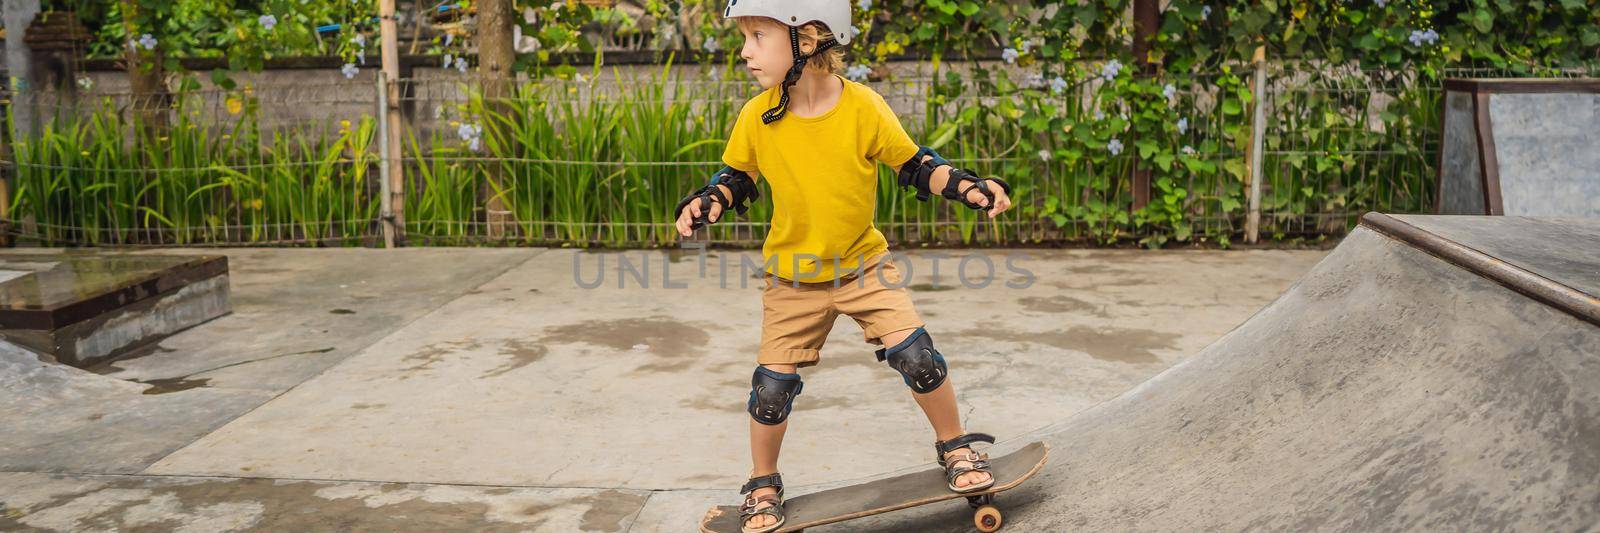 Athletic boy in helmet and knee pads learns to skateboard with in a skate park. Children education sports. BANNER, LONG FORMAT